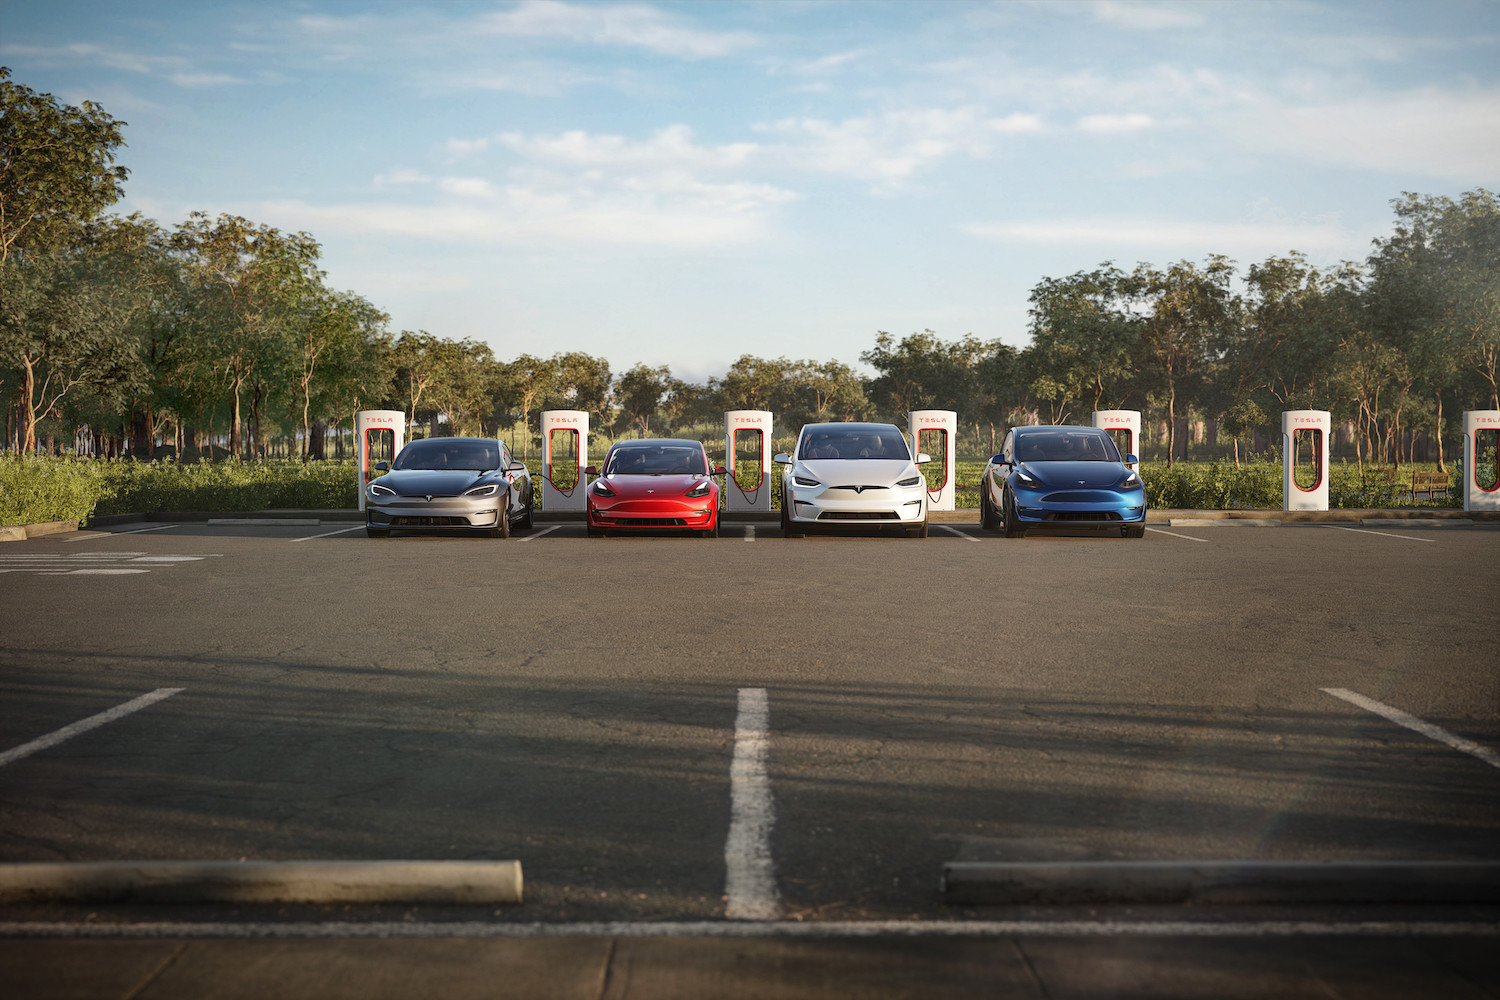 A lineup of Tesla electric cars lined up in front of a parking lot charger with trees in the background.